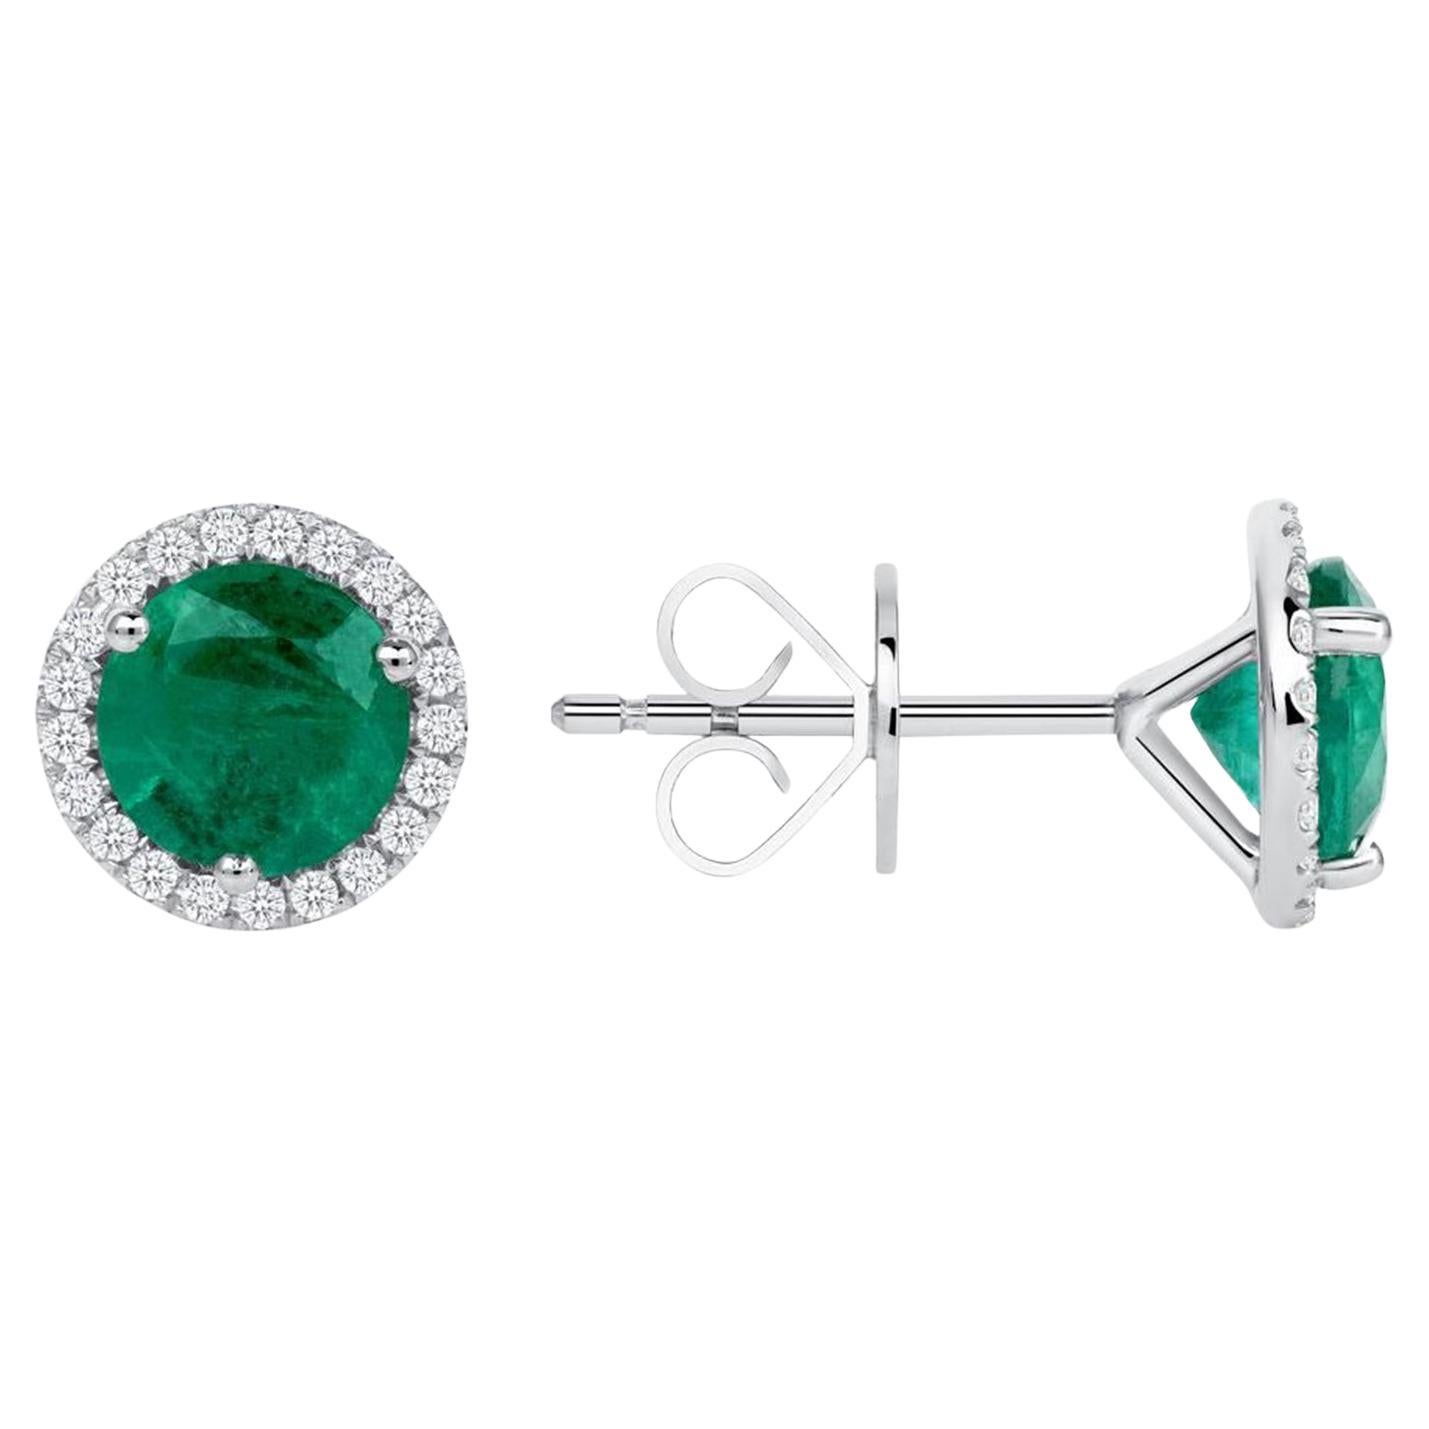 1.53 CT Natural Colombian Emerald 0.15 CT Diamonds 14K White Gold Stud Earrings